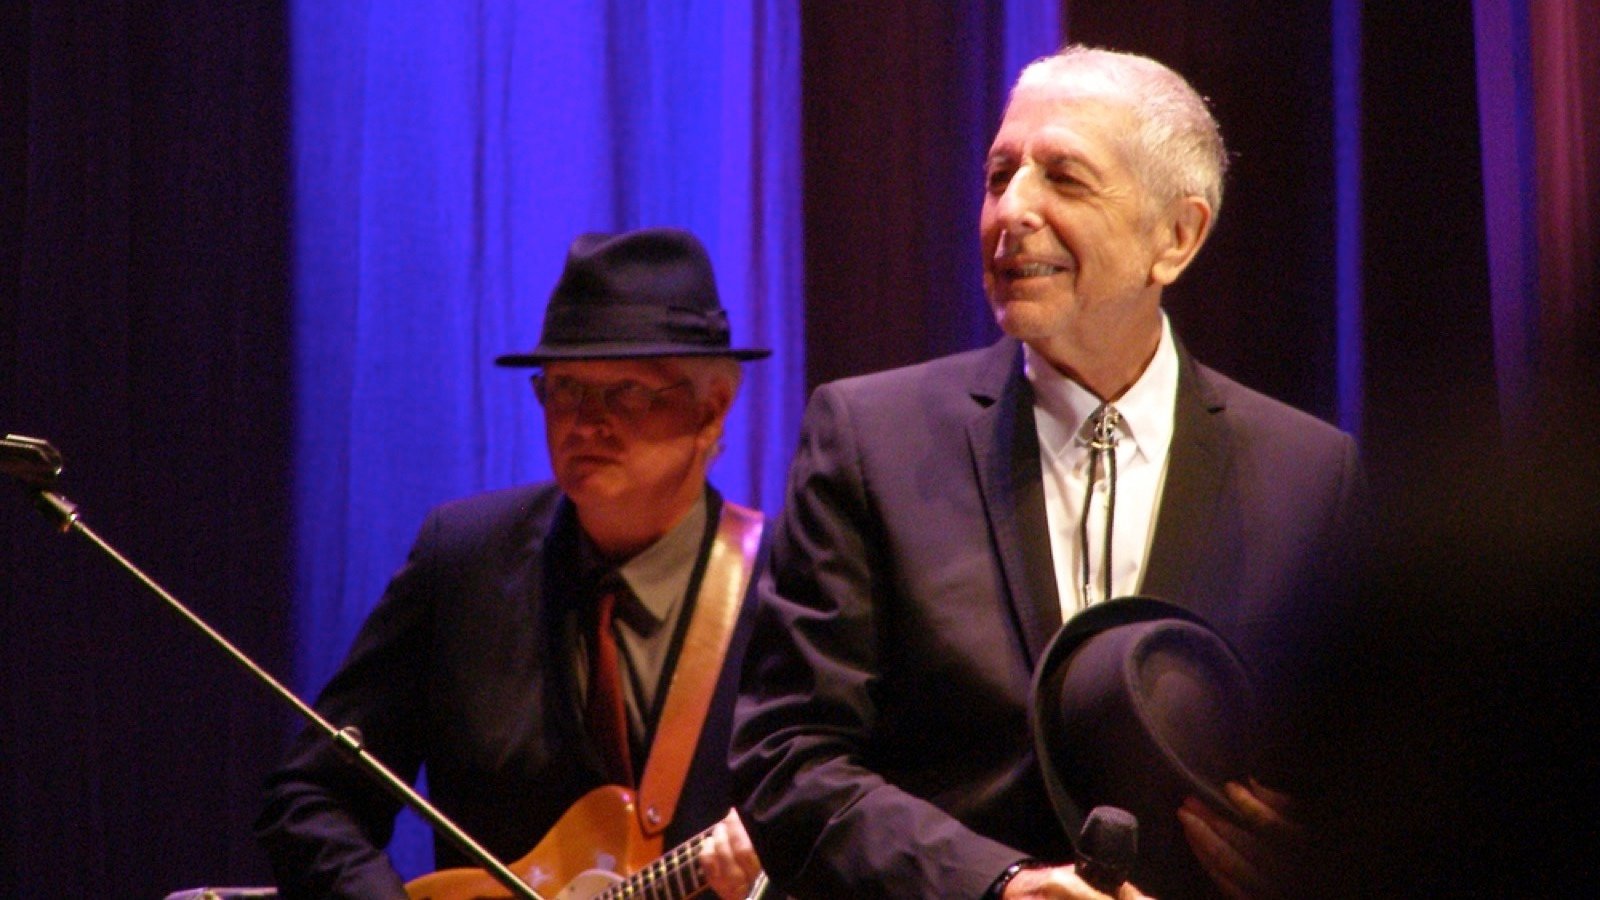 <p>Born in Quebec in 1934, Leonard Cohen was a prolific singer-songwriter who will be remembered for some rather mournful tunes. Some of his back catalog is more upbeat, but those sad songs are his best. Many forum members continue to play this Canadian artist, and he’ll remain on the playlists for the rest of their lives.</p>